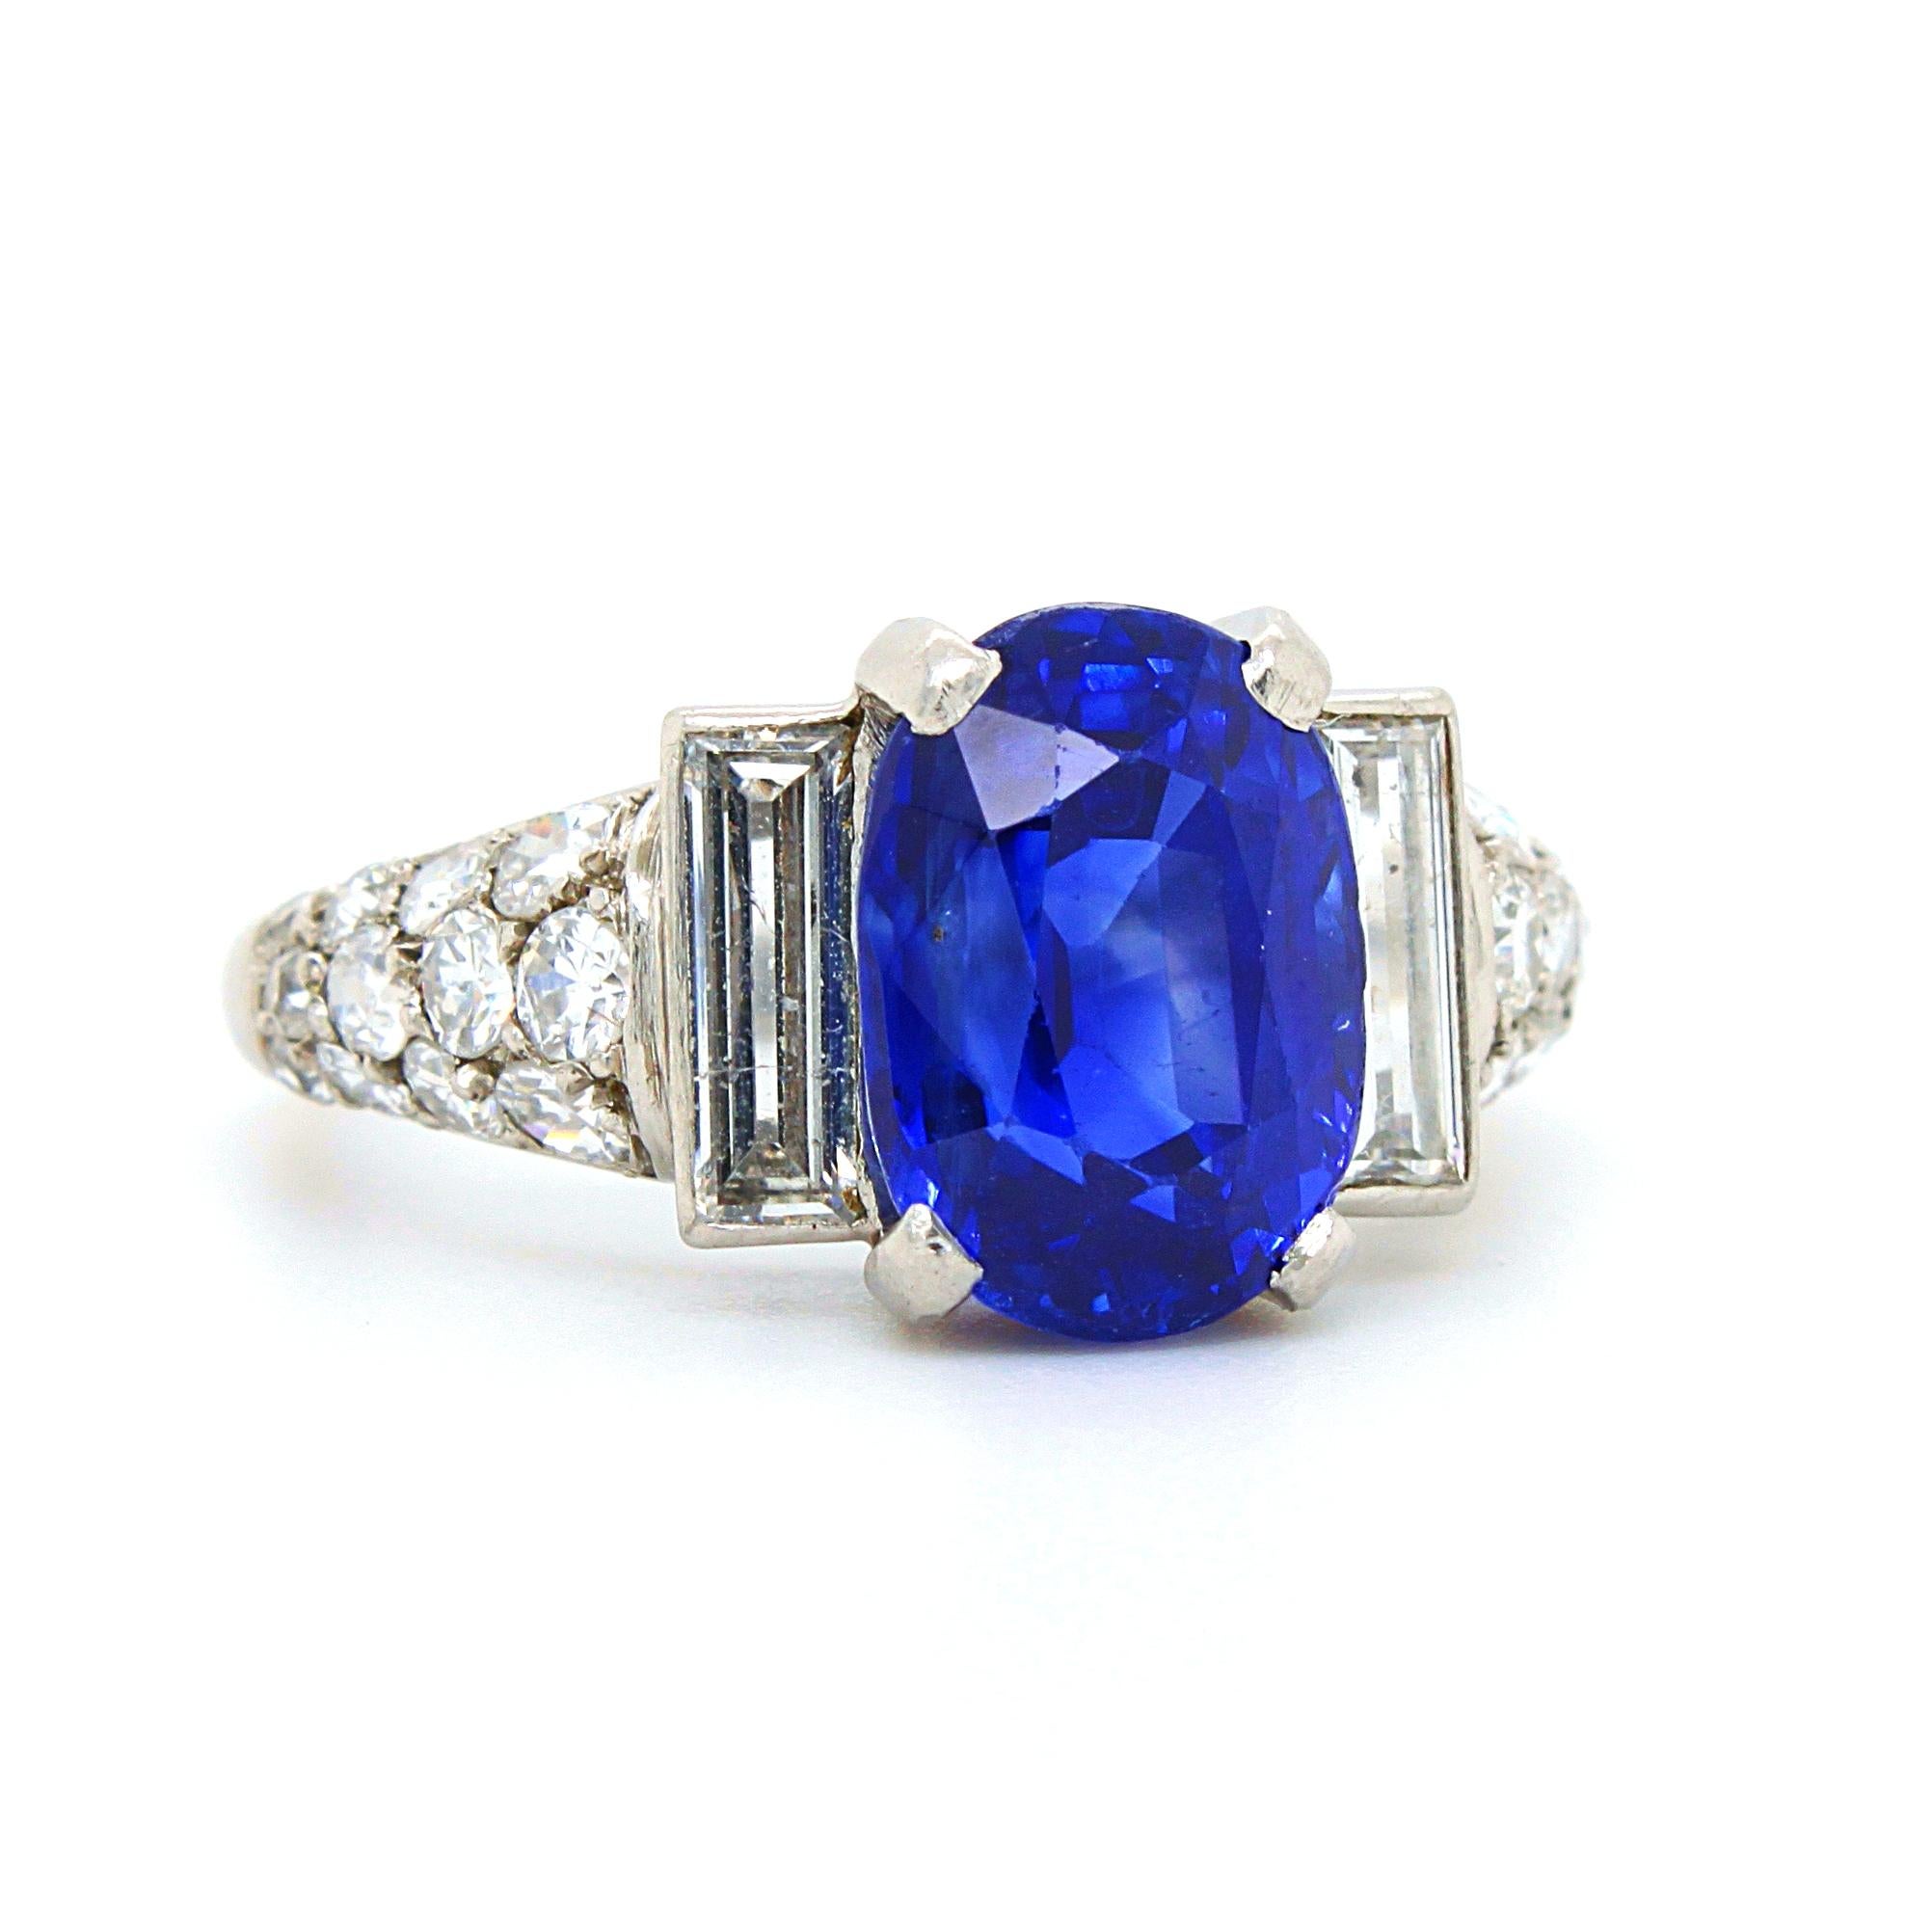 An Art Deco sapphire and diamond ring in platinum, France, ca. 1920s. The cushion shaped sapphire weighs 5.12 carats and is natural, not heated - accompanied by a gemological report by DSEF. The sapphire has a stunning royal blue colour and crystal